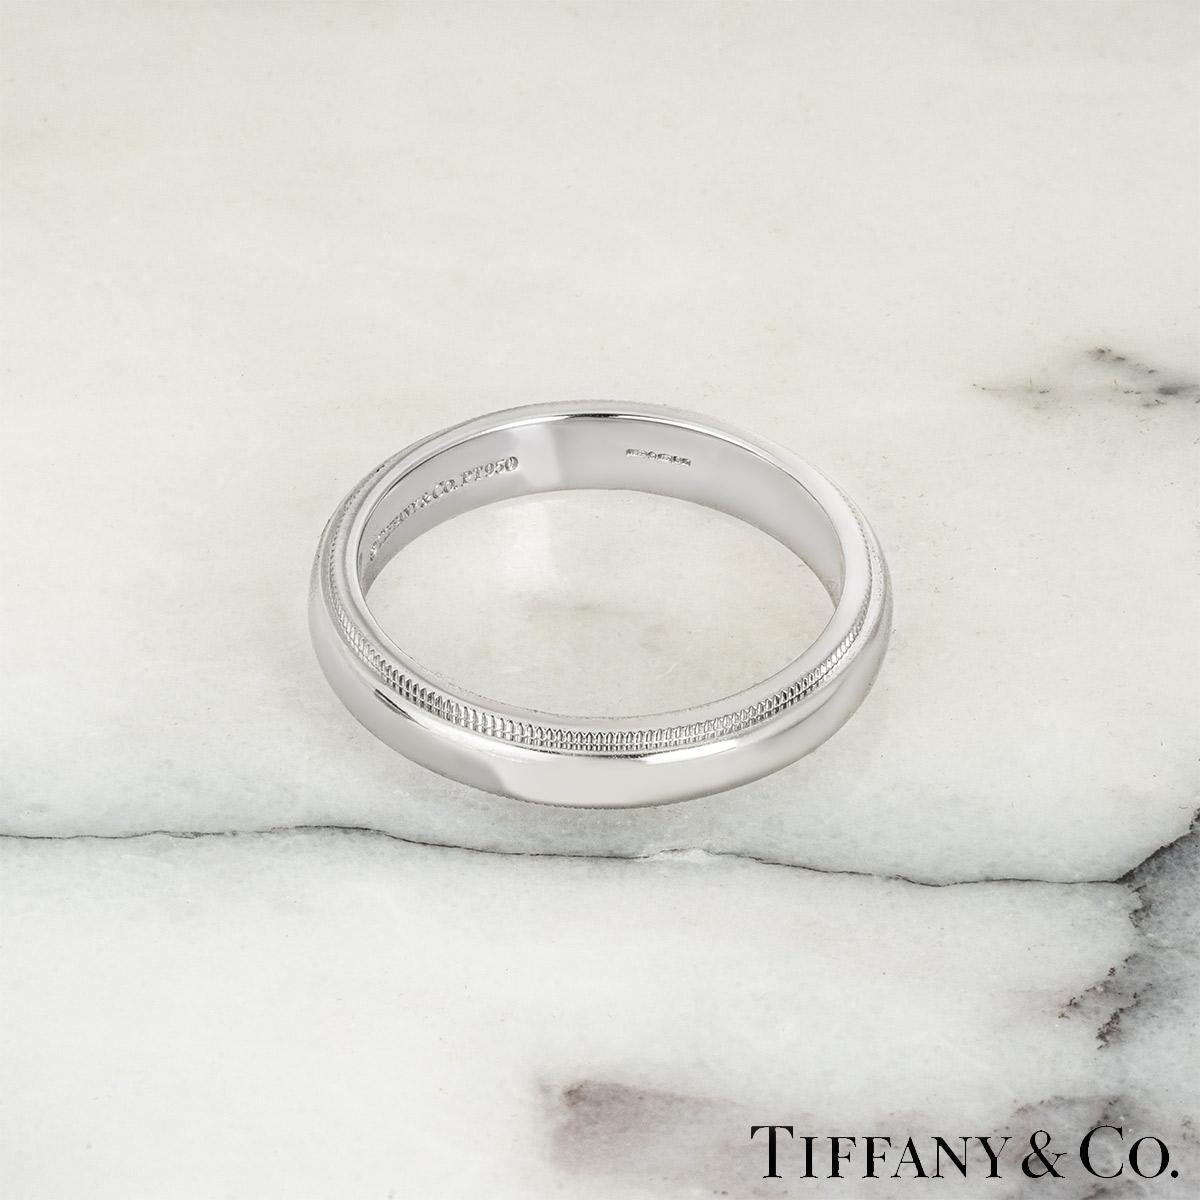 Tiffany & Co. Platinum Tiffany Together 4mm Milgrain Ring In Excellent Condition For Sale In London, GB